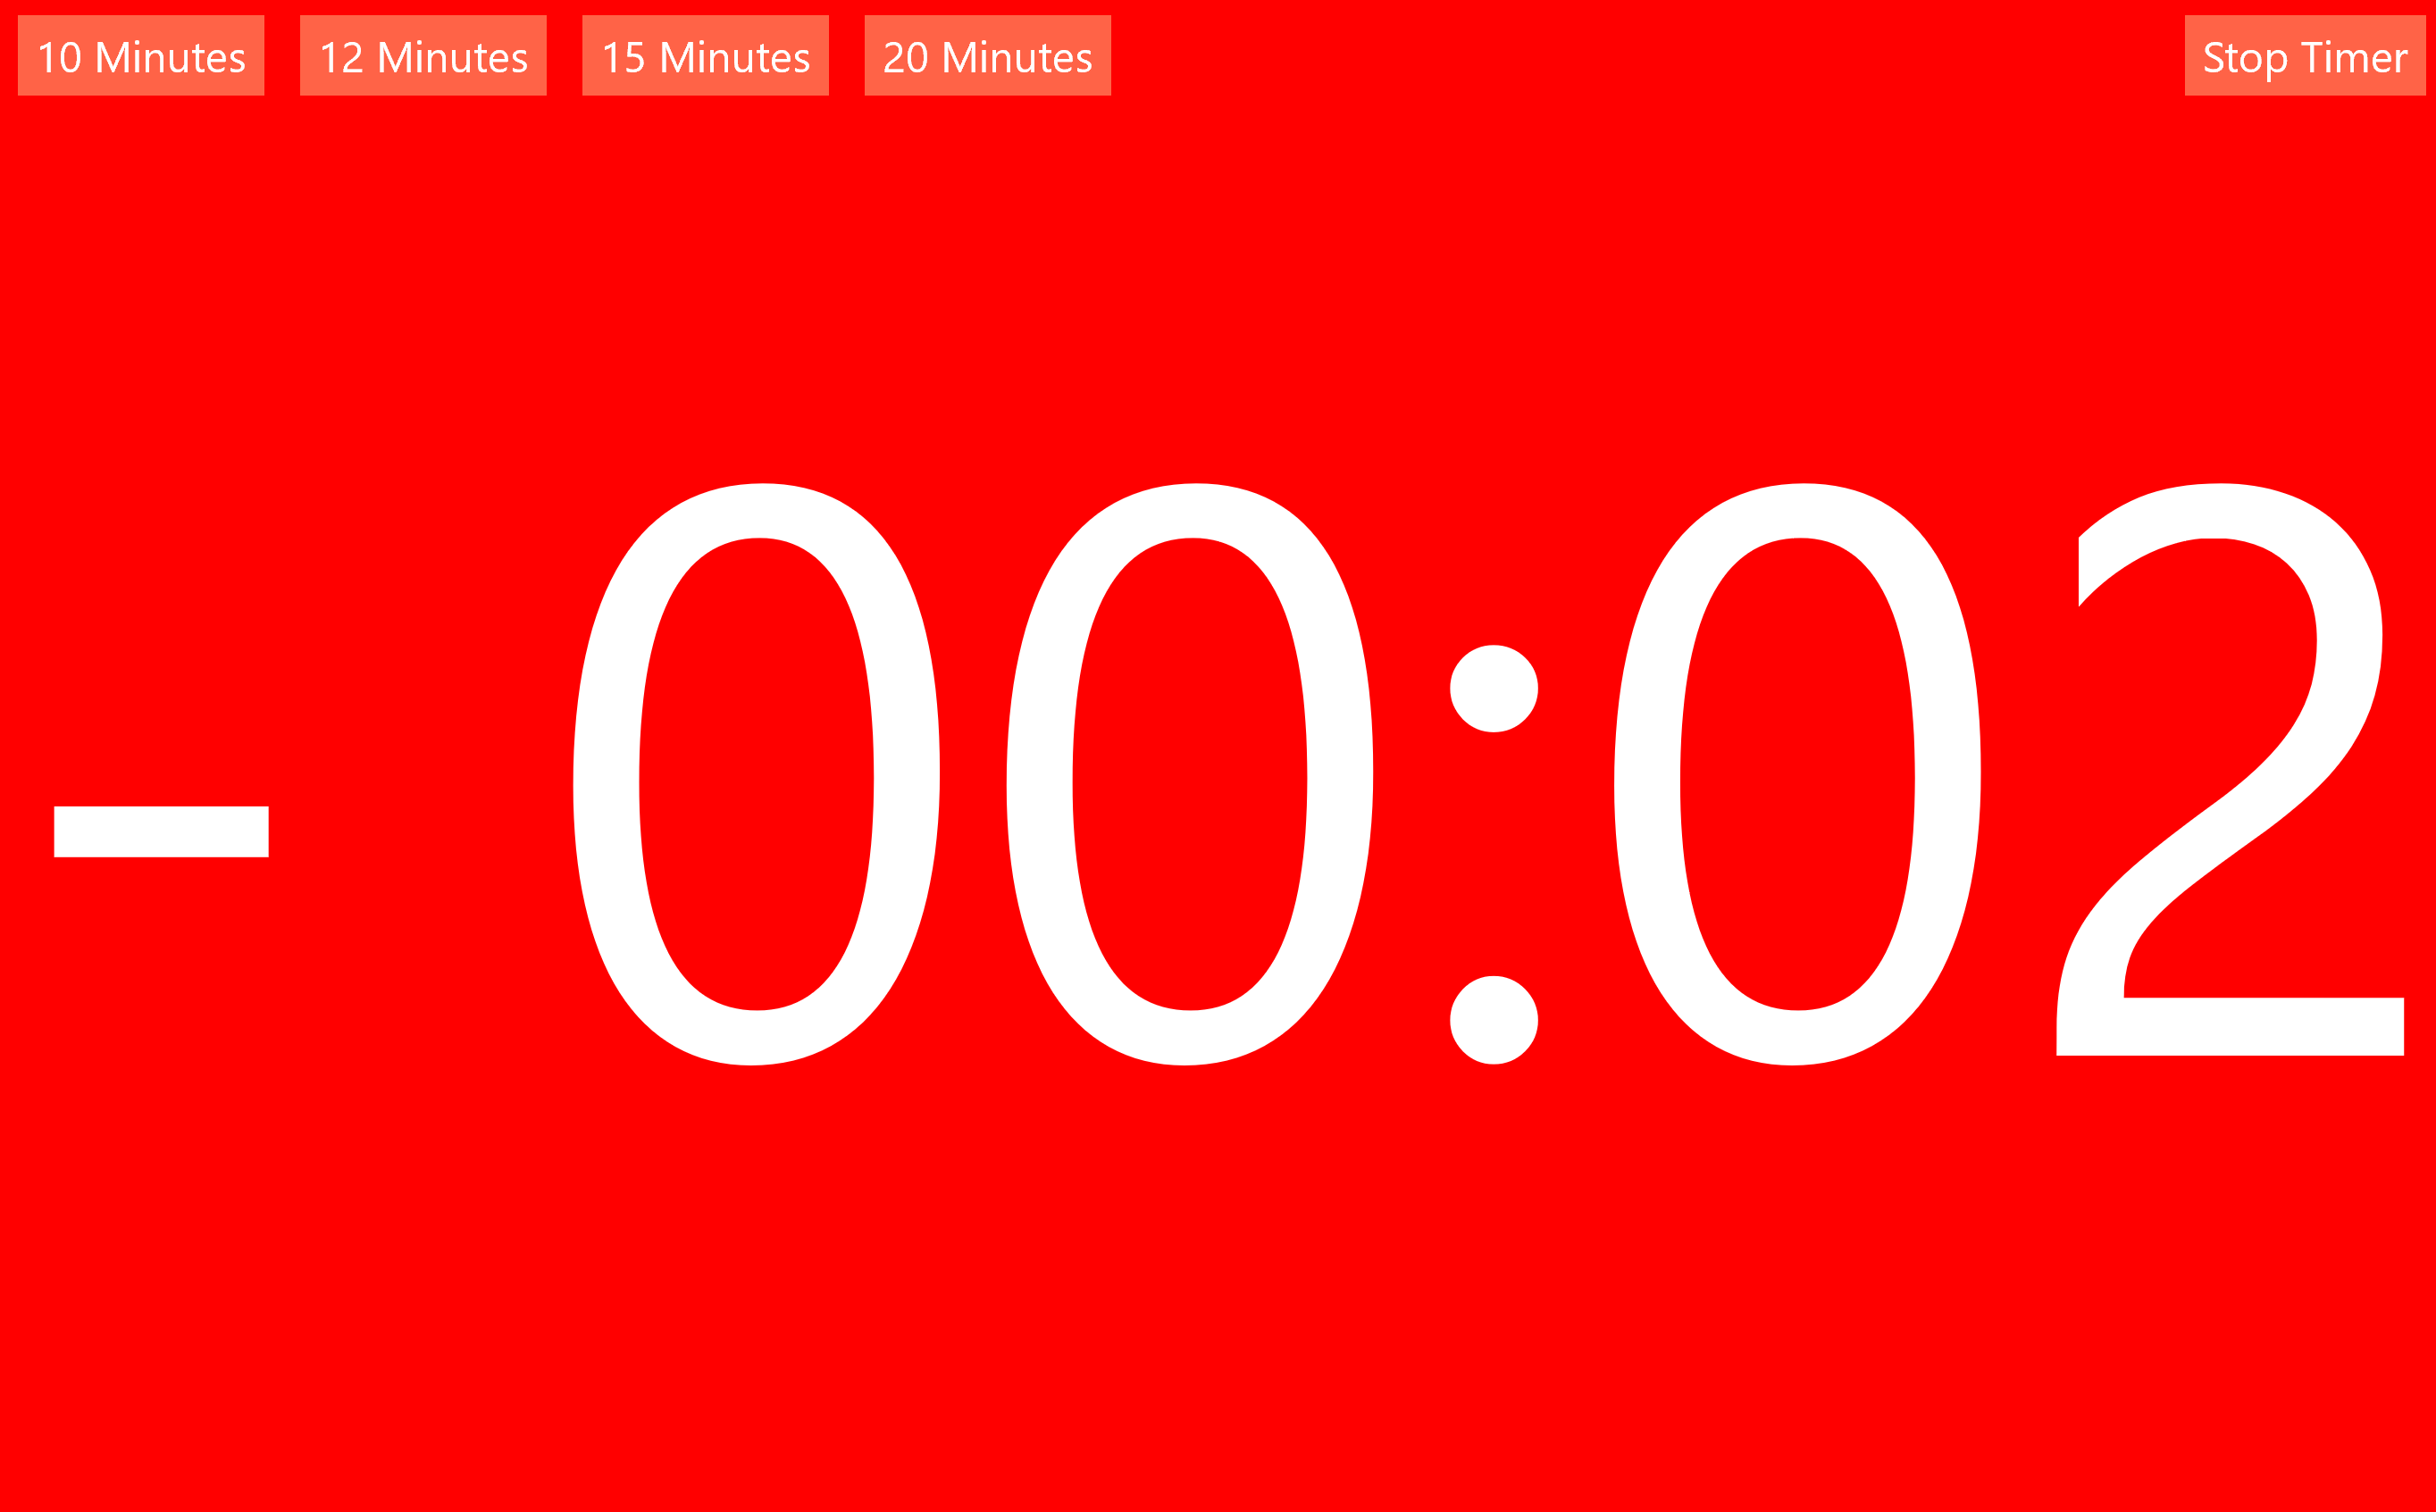 Background turns red at 0:00 and starts counting up.